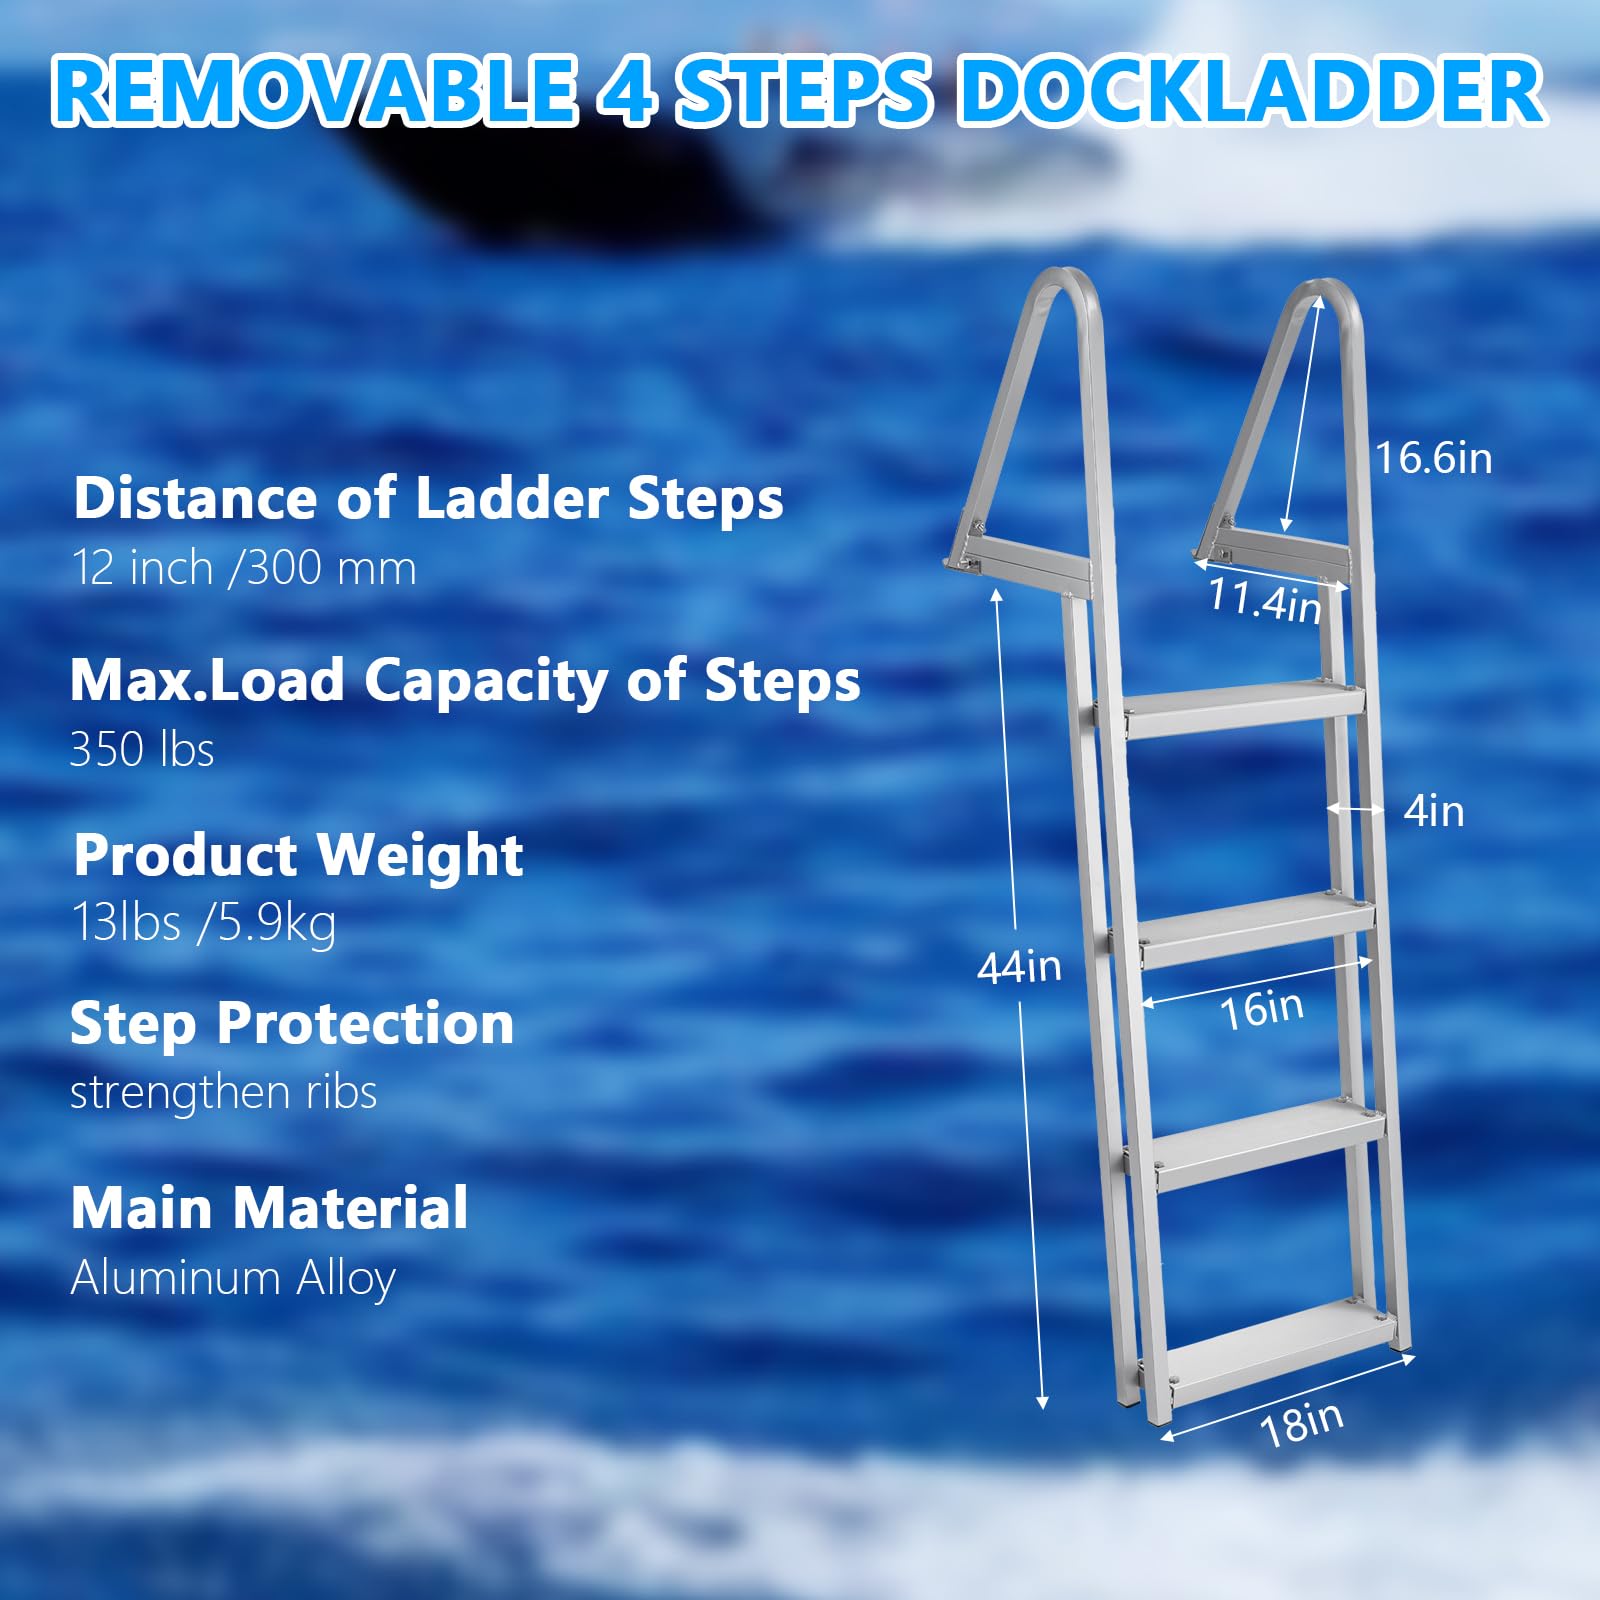 GARVEE Removable Dock Ladder 4 Steps + Anti-Corrosion 6063 Aluminum + Reinforced Dual Handrails + Nonslip Pedals + Adjustable Height + 500lbs Capacity + Suitable for Lake/Pool/Boarding